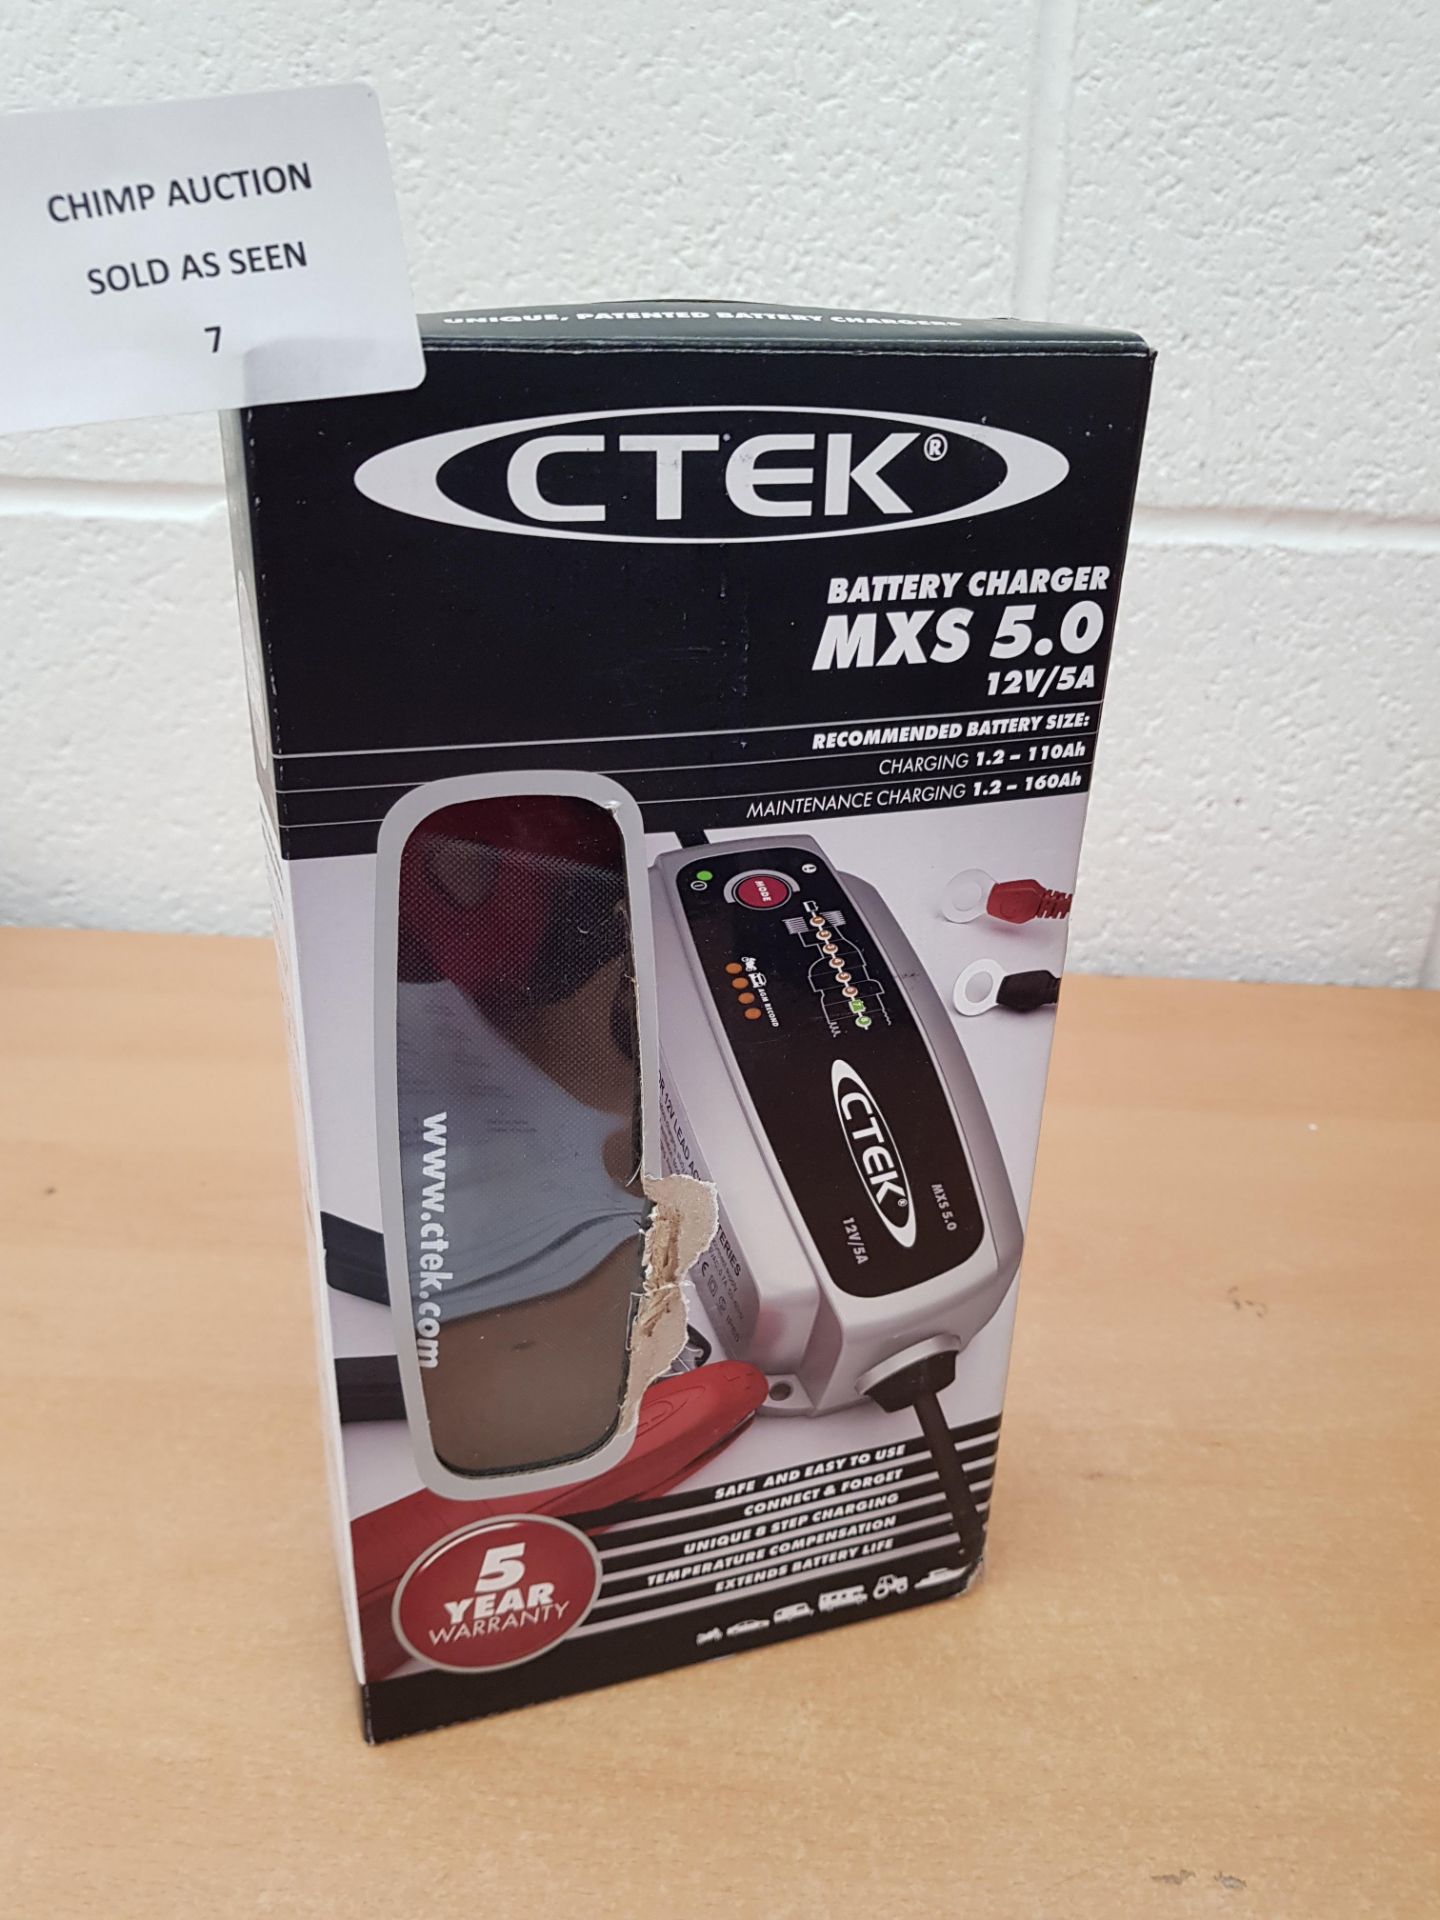 CTEK MXS 5.0 Fully Automatic Battery Charger RRP £79.99.